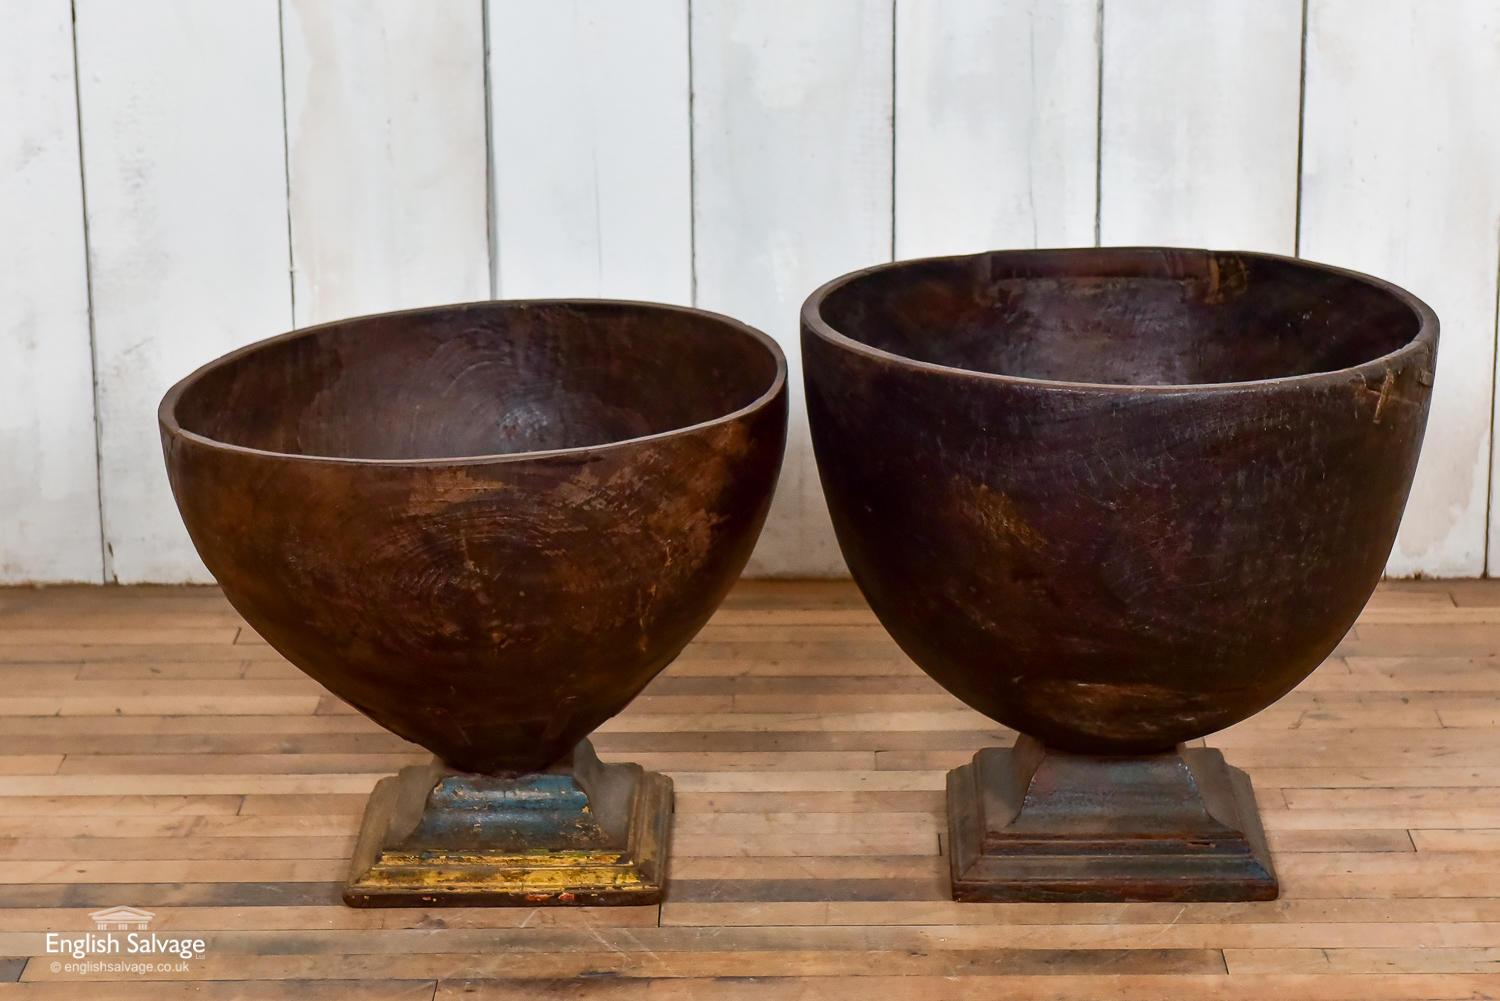 Impressive old teak bowls with strap iron reinforcements. The bowls are carved from single pieces of wood which are then mounted onto wooden stands.